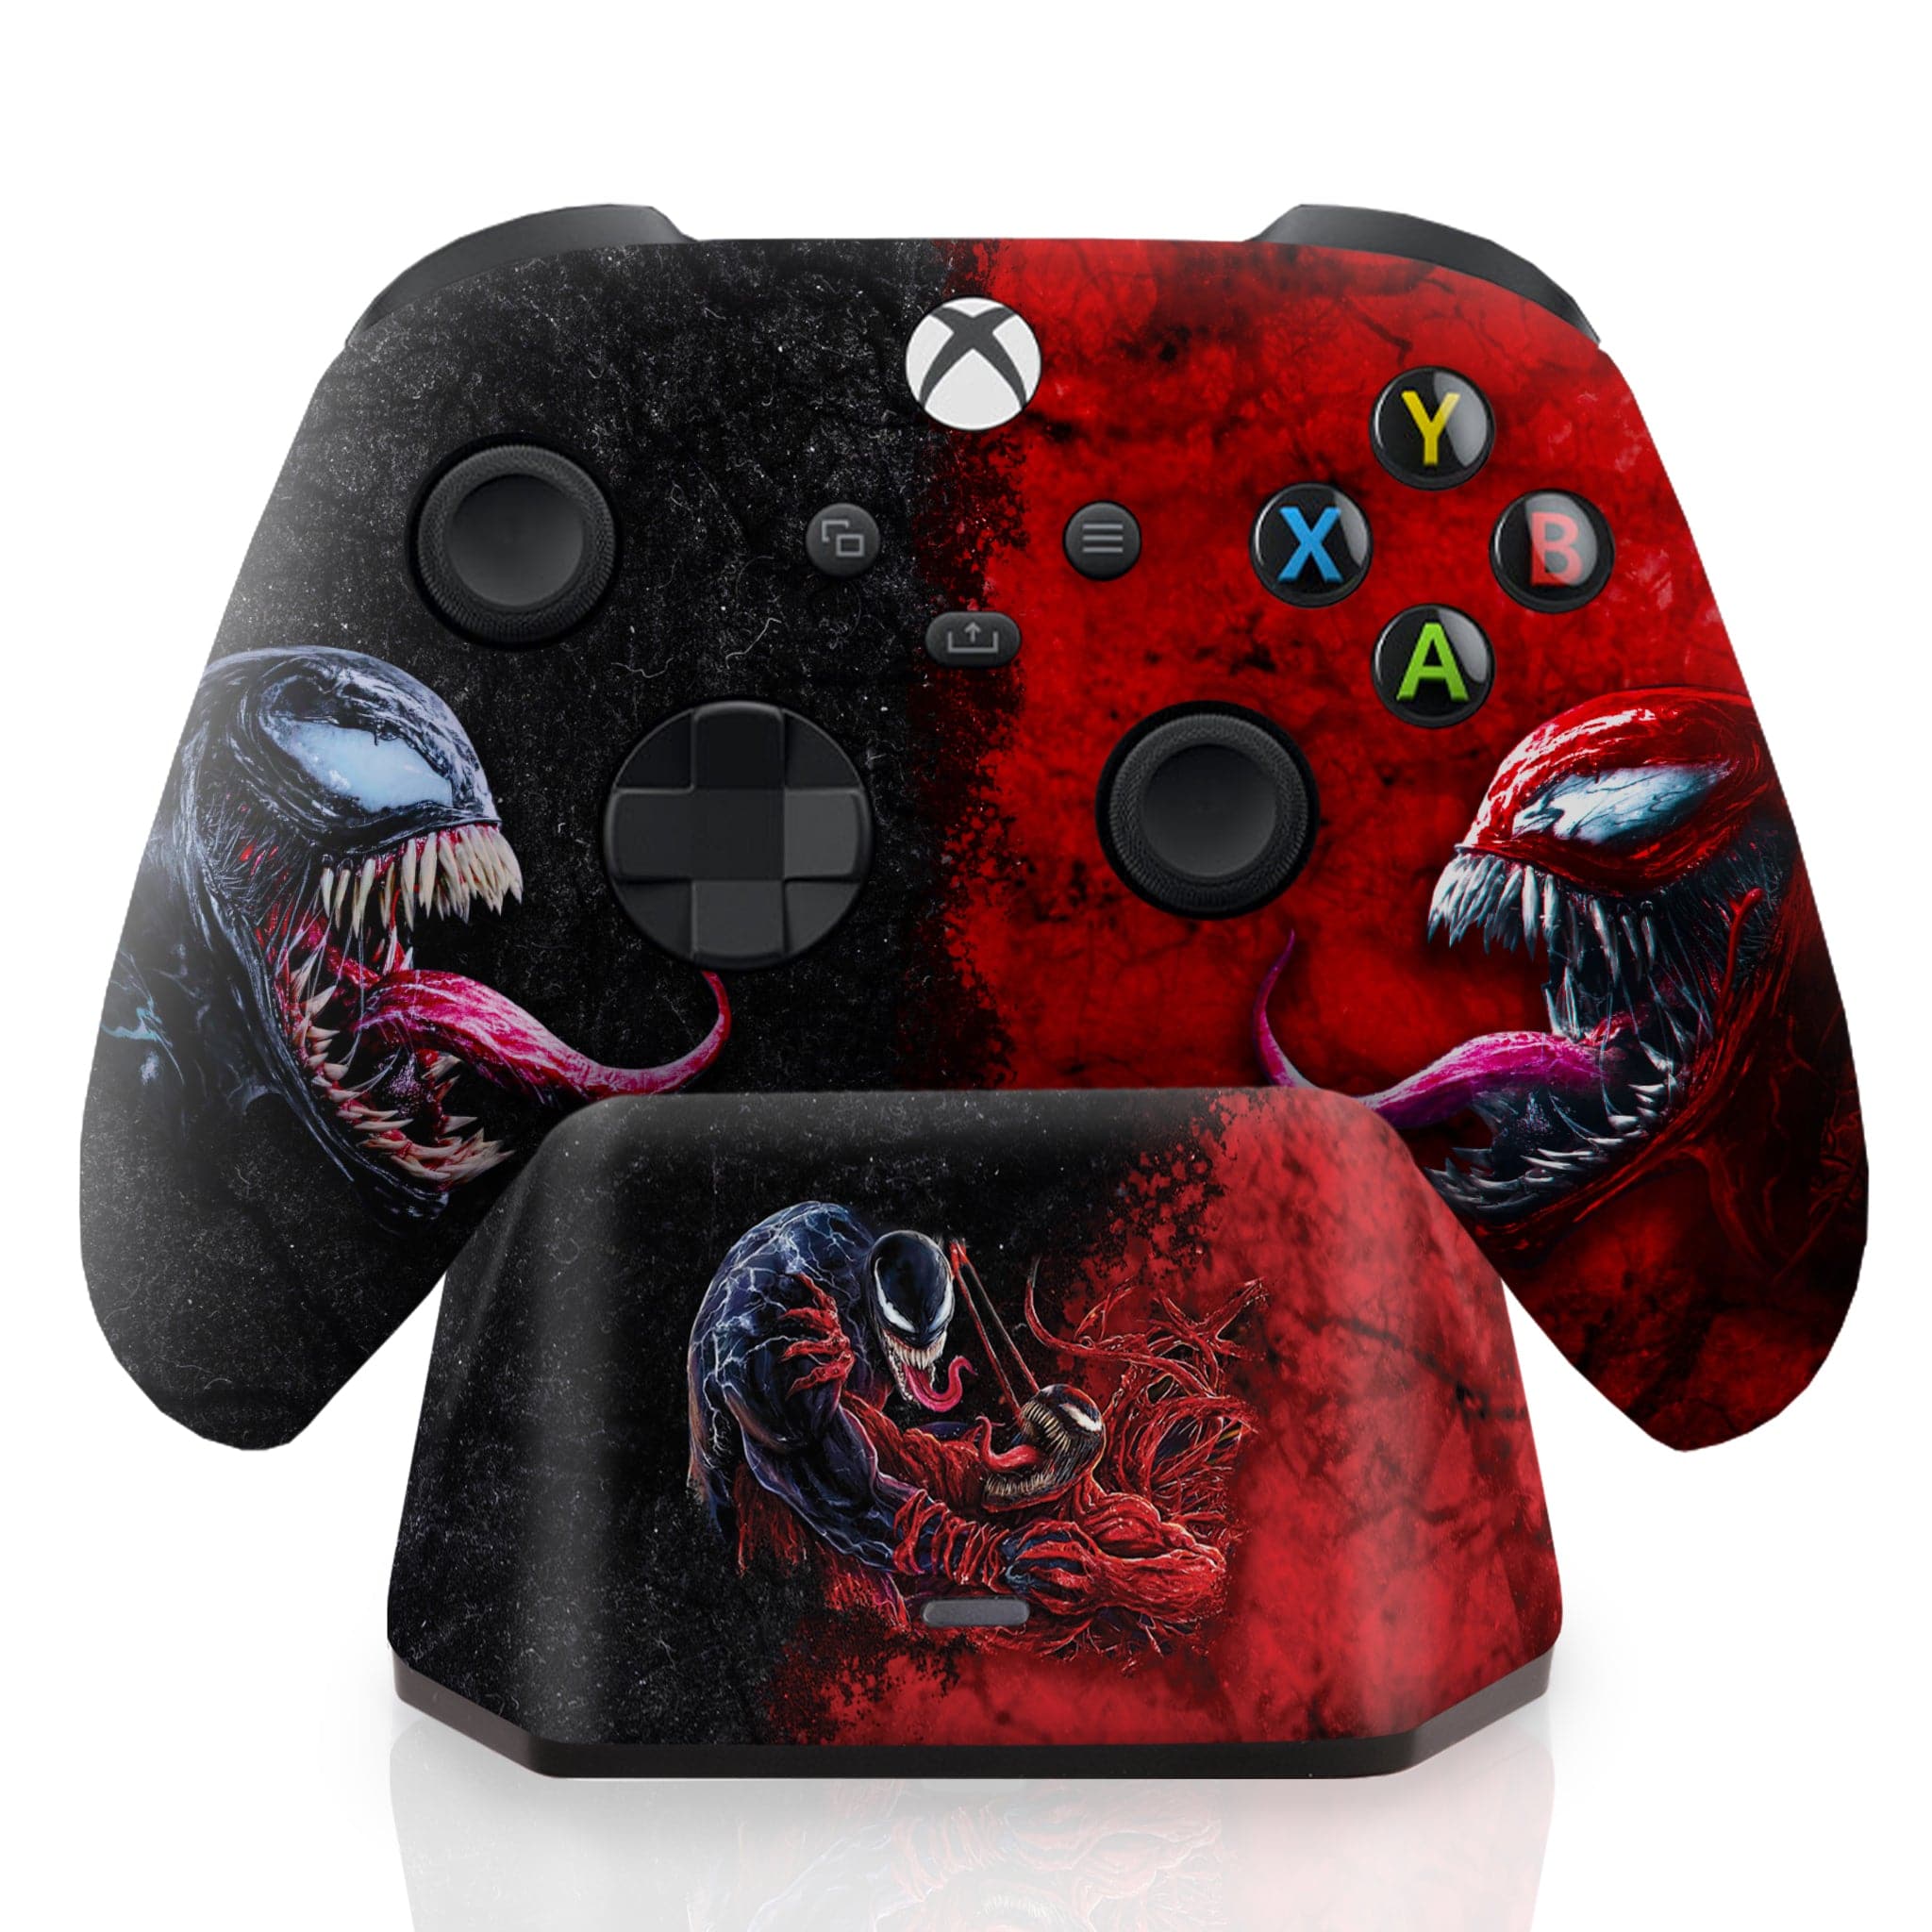 Venom Vs Carnage Xbox Series X Controller with Charging Station | Series X